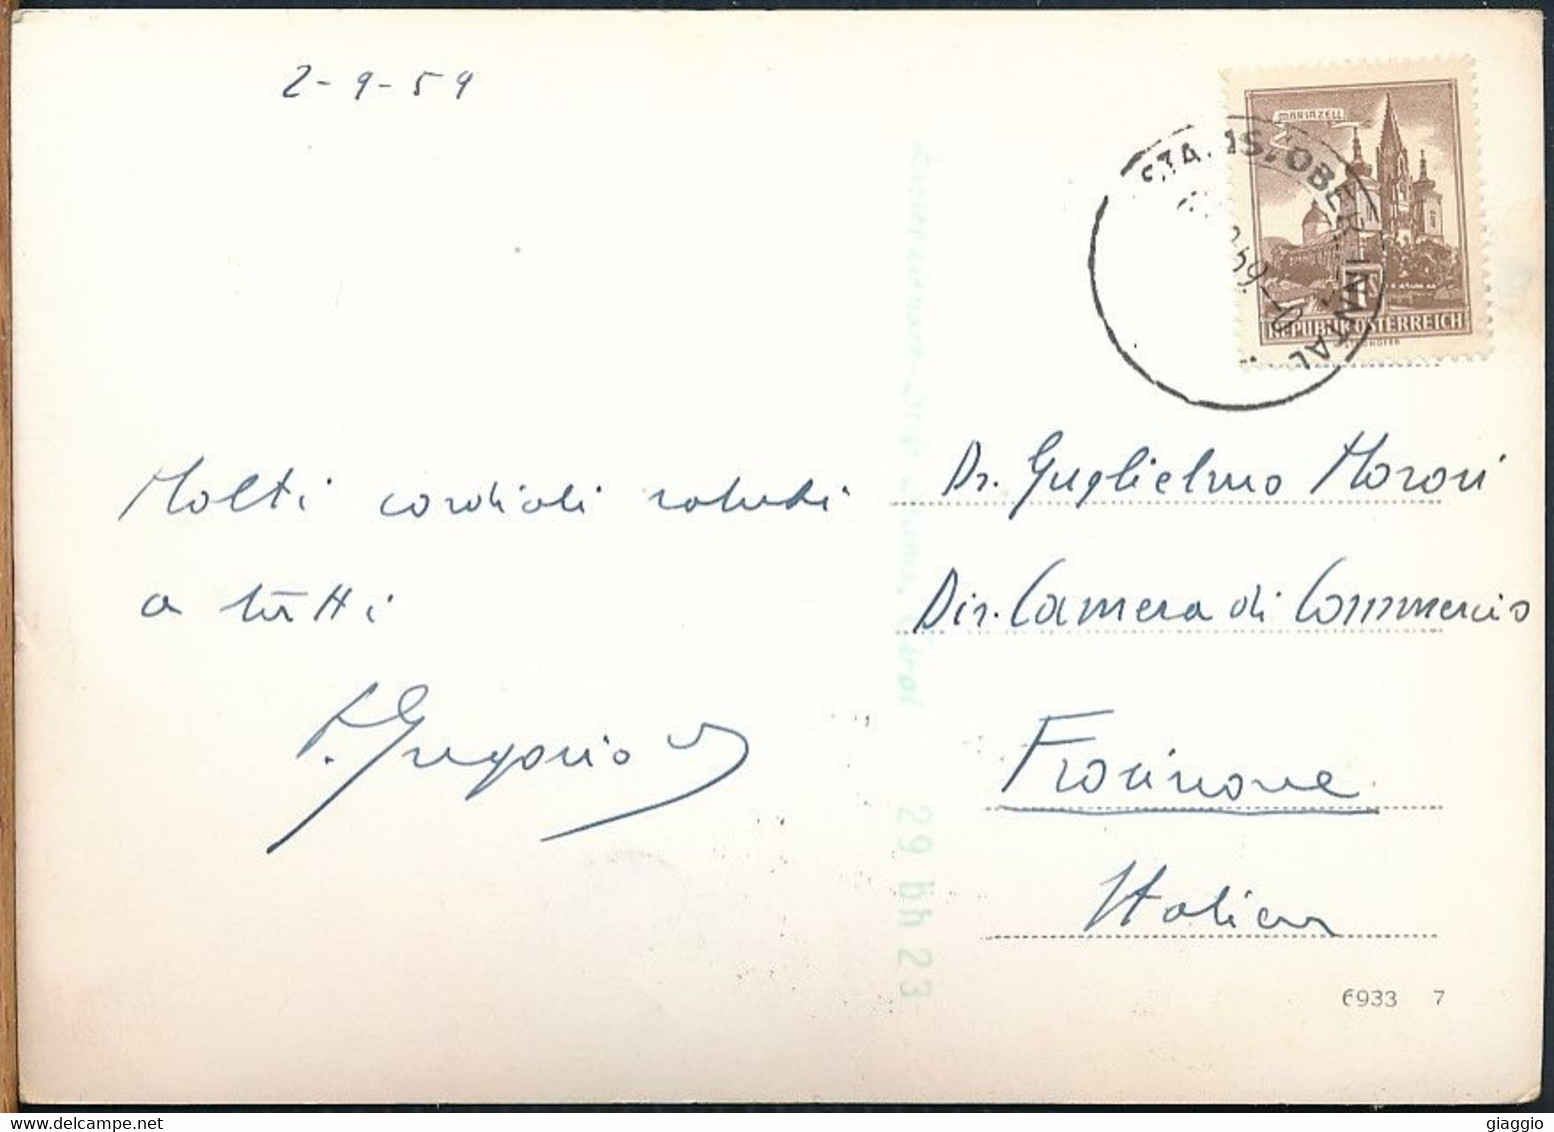 °°° 21680 - STAMS - ZISTERZIENSER - 1959 With Stamps °°° - Stams